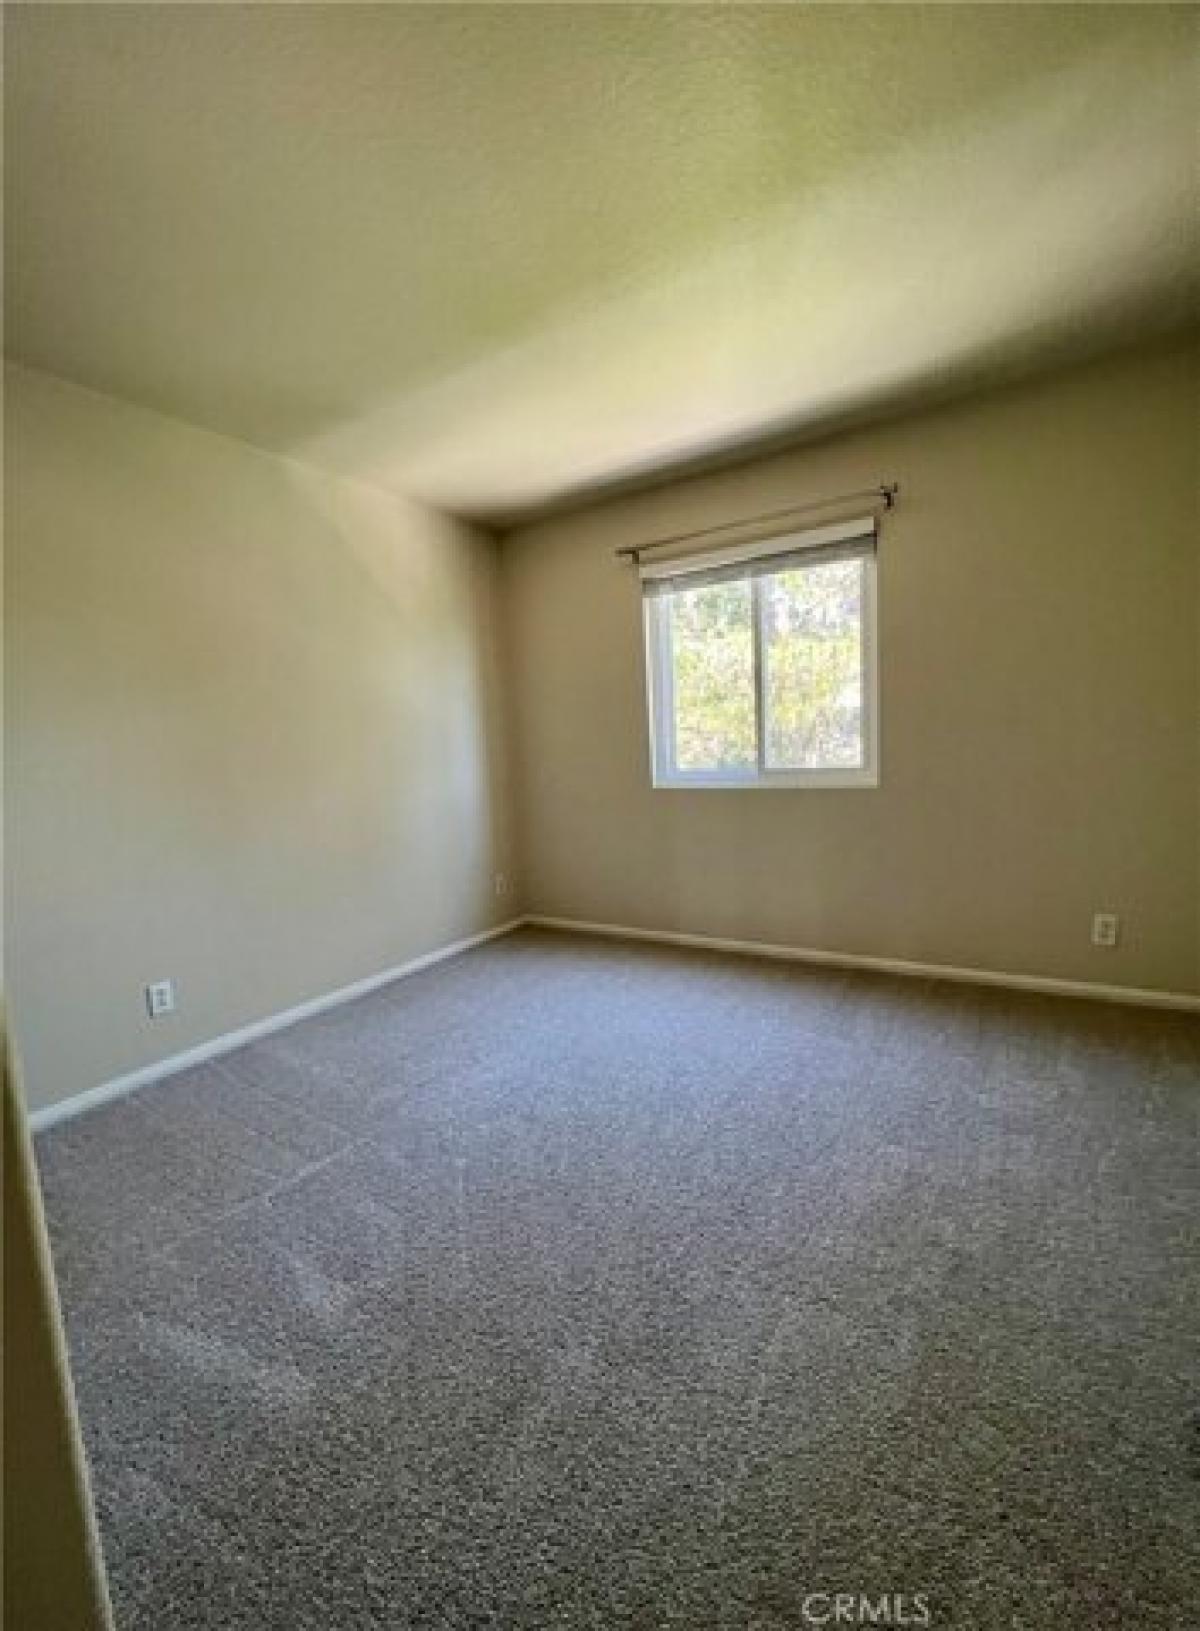 Picture of Home For Rent in Aliso Viejo, California, United States